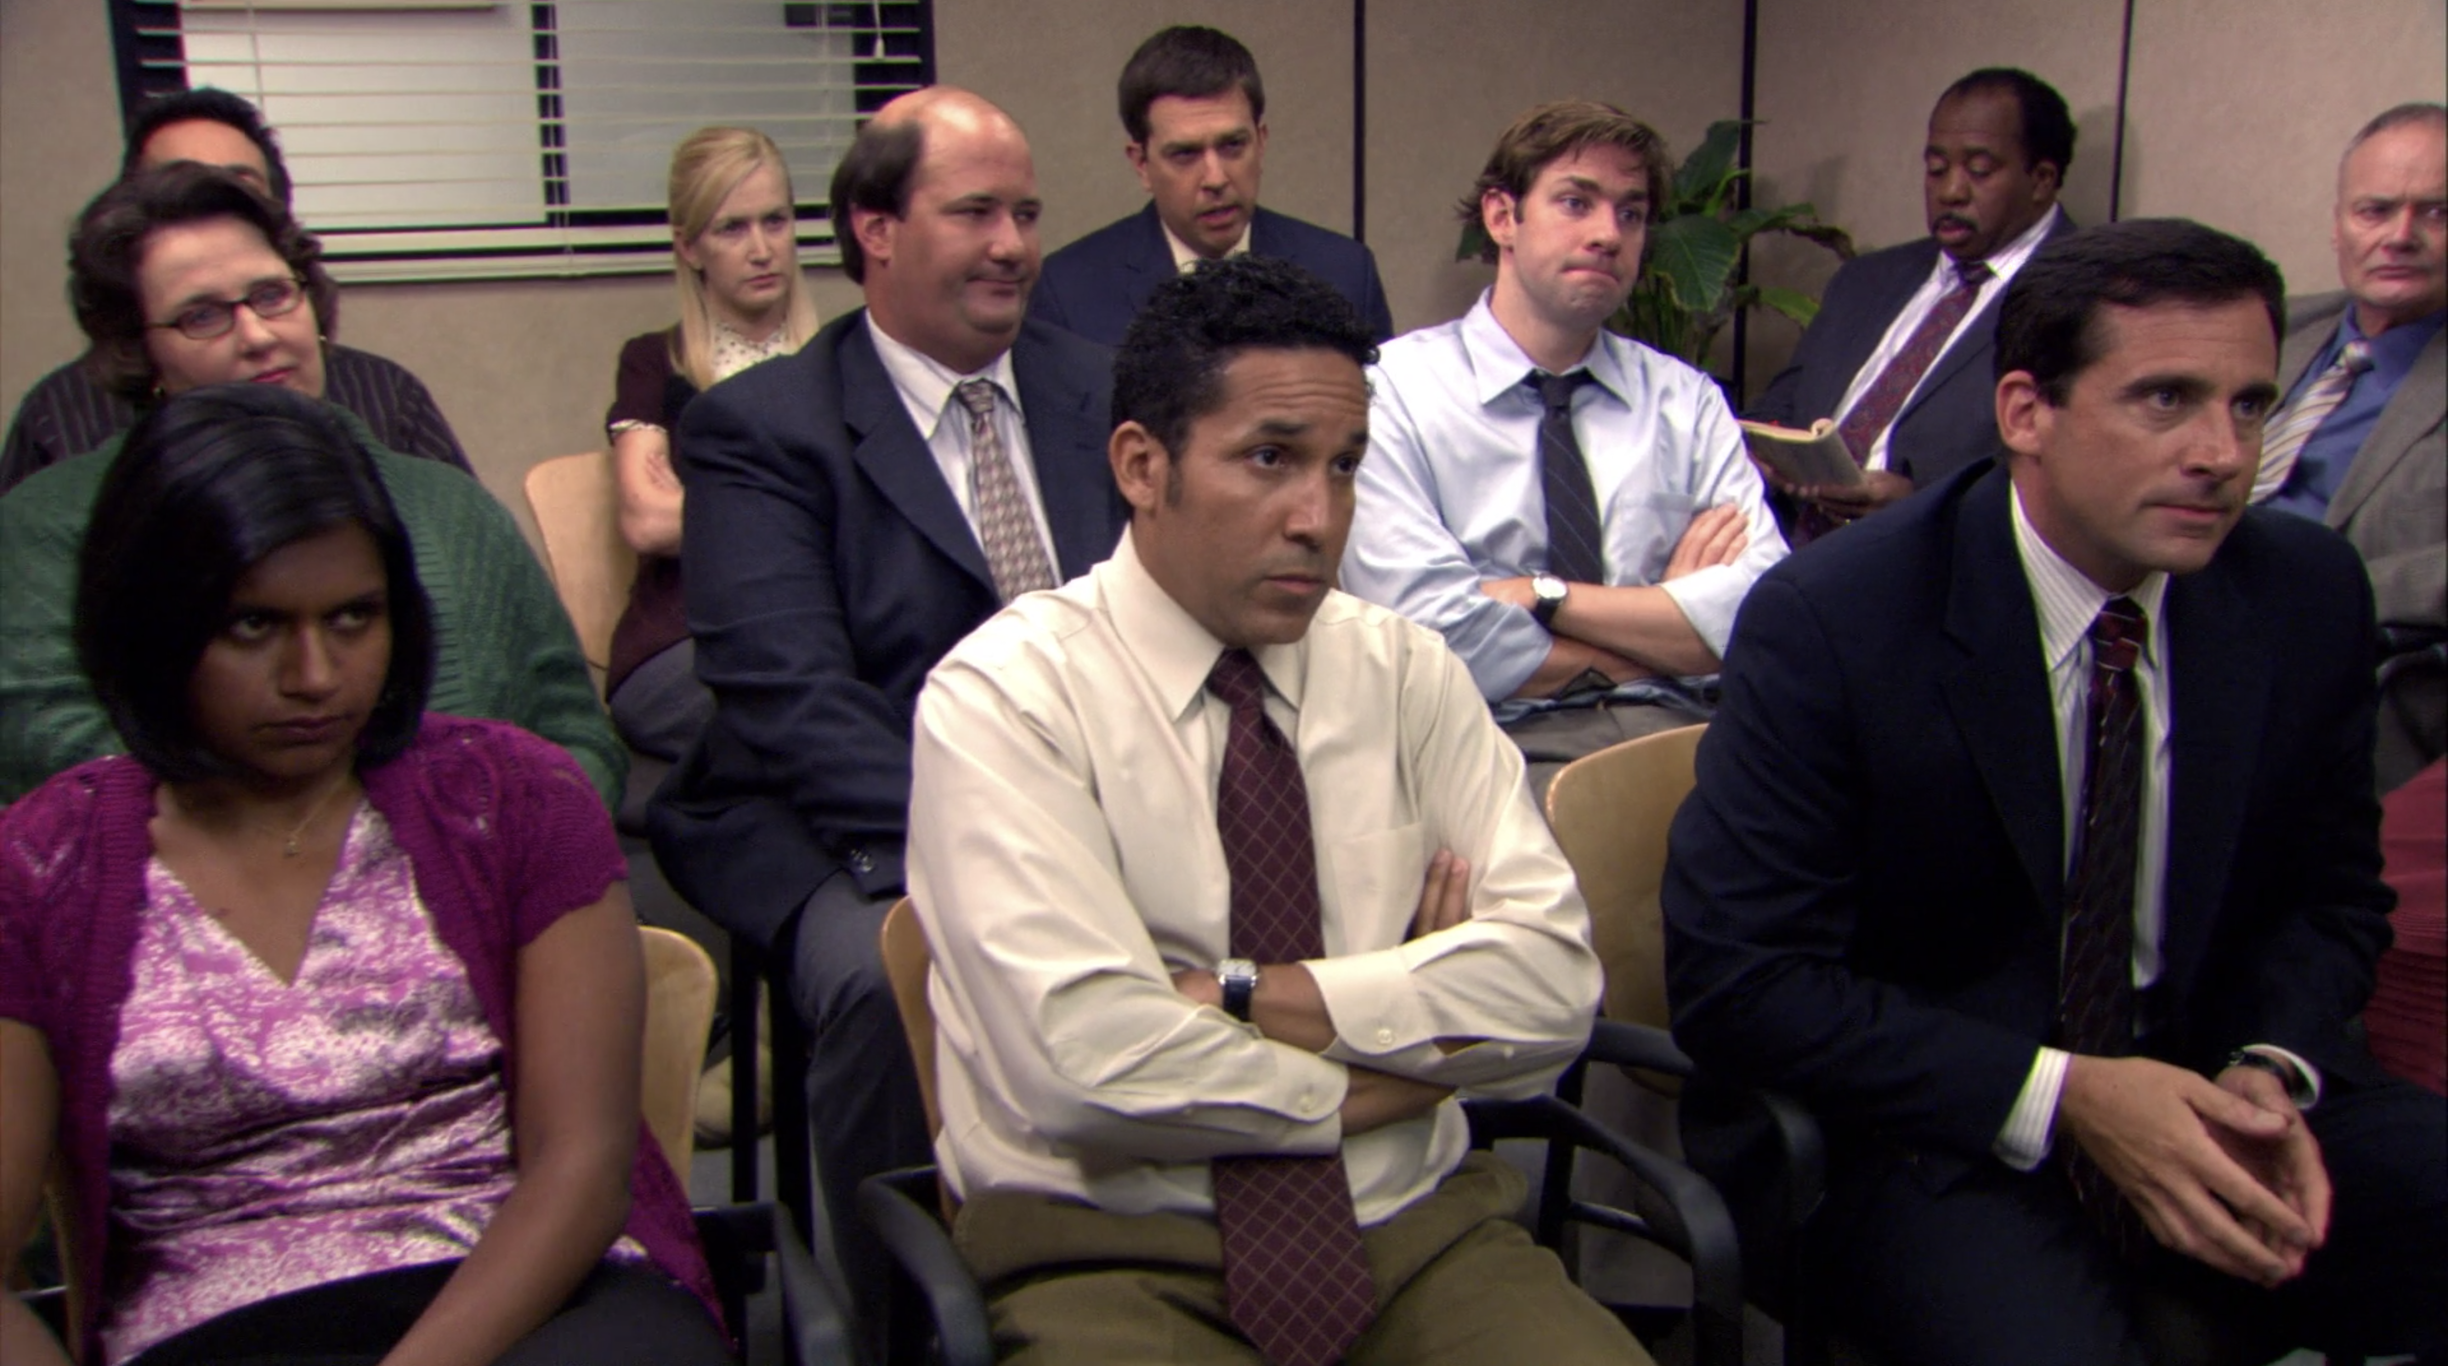 The cast of the Office sit in a room together